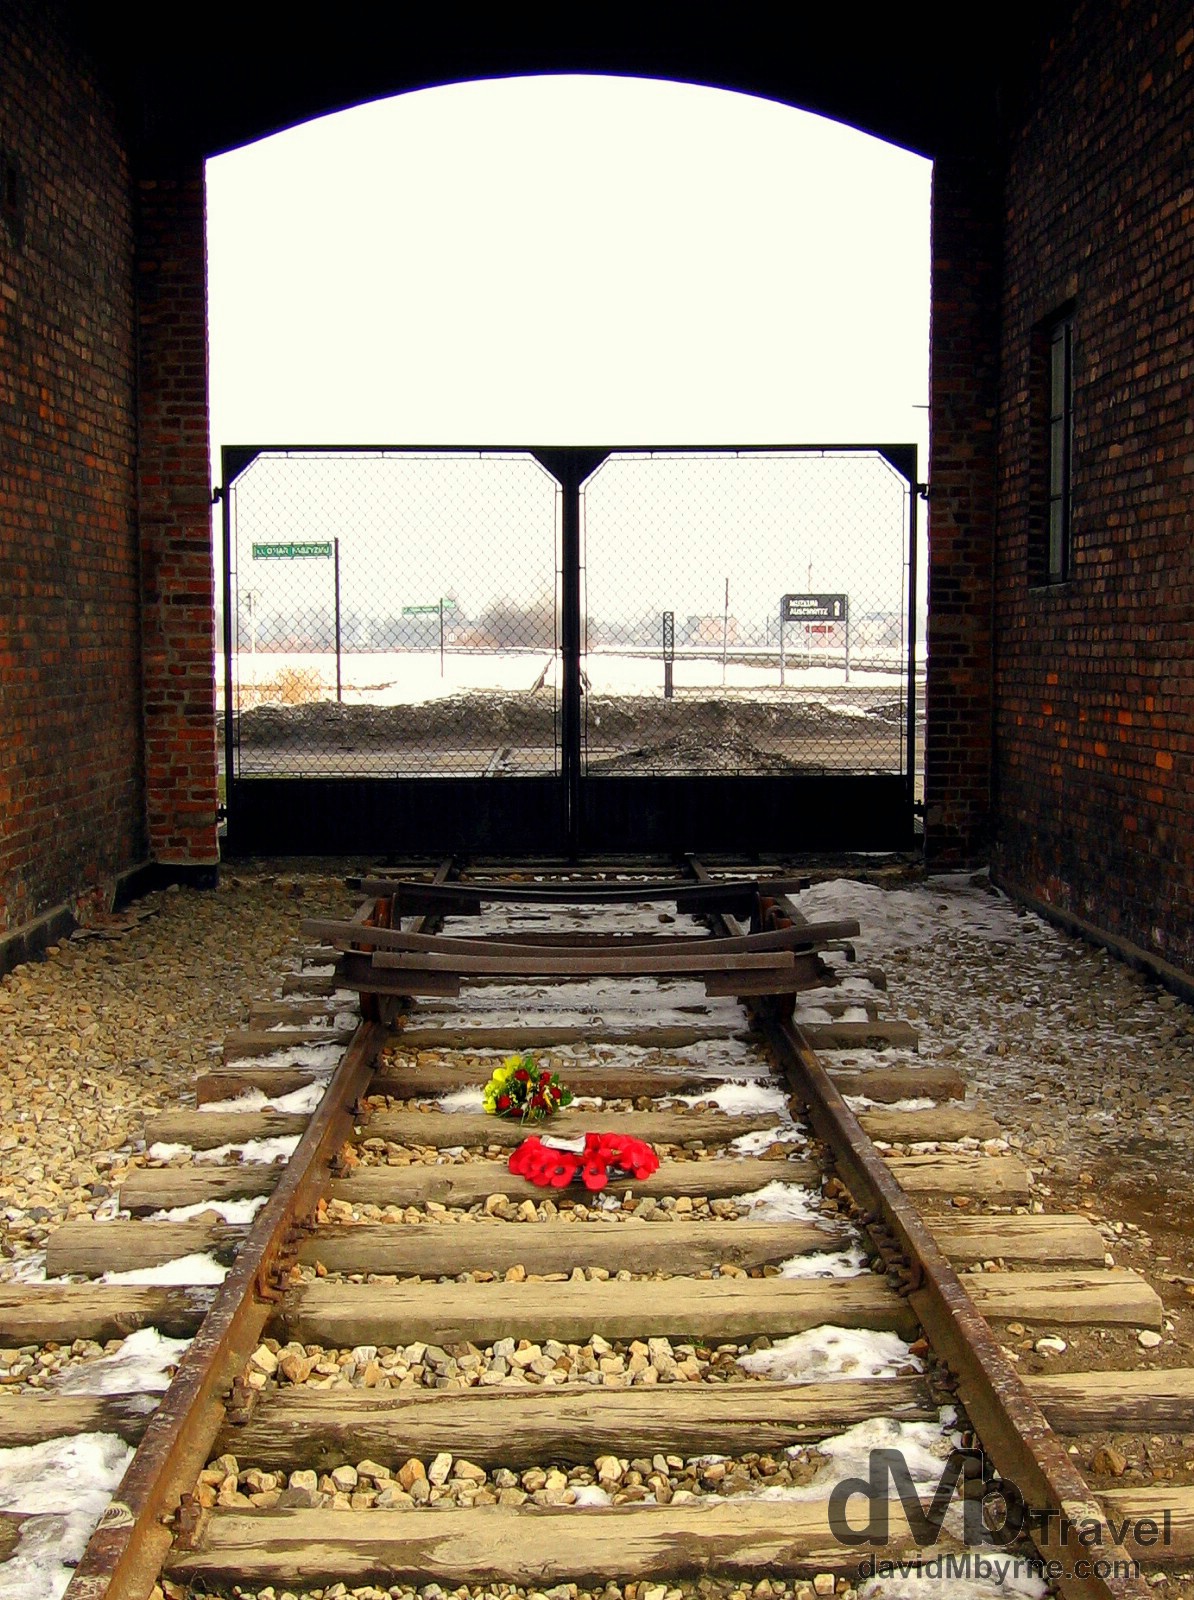 Two small bouquets on the tracks at the entrance to the Birkenau Concentration Camp, Brzezinka, Poland. March 7th 2006.